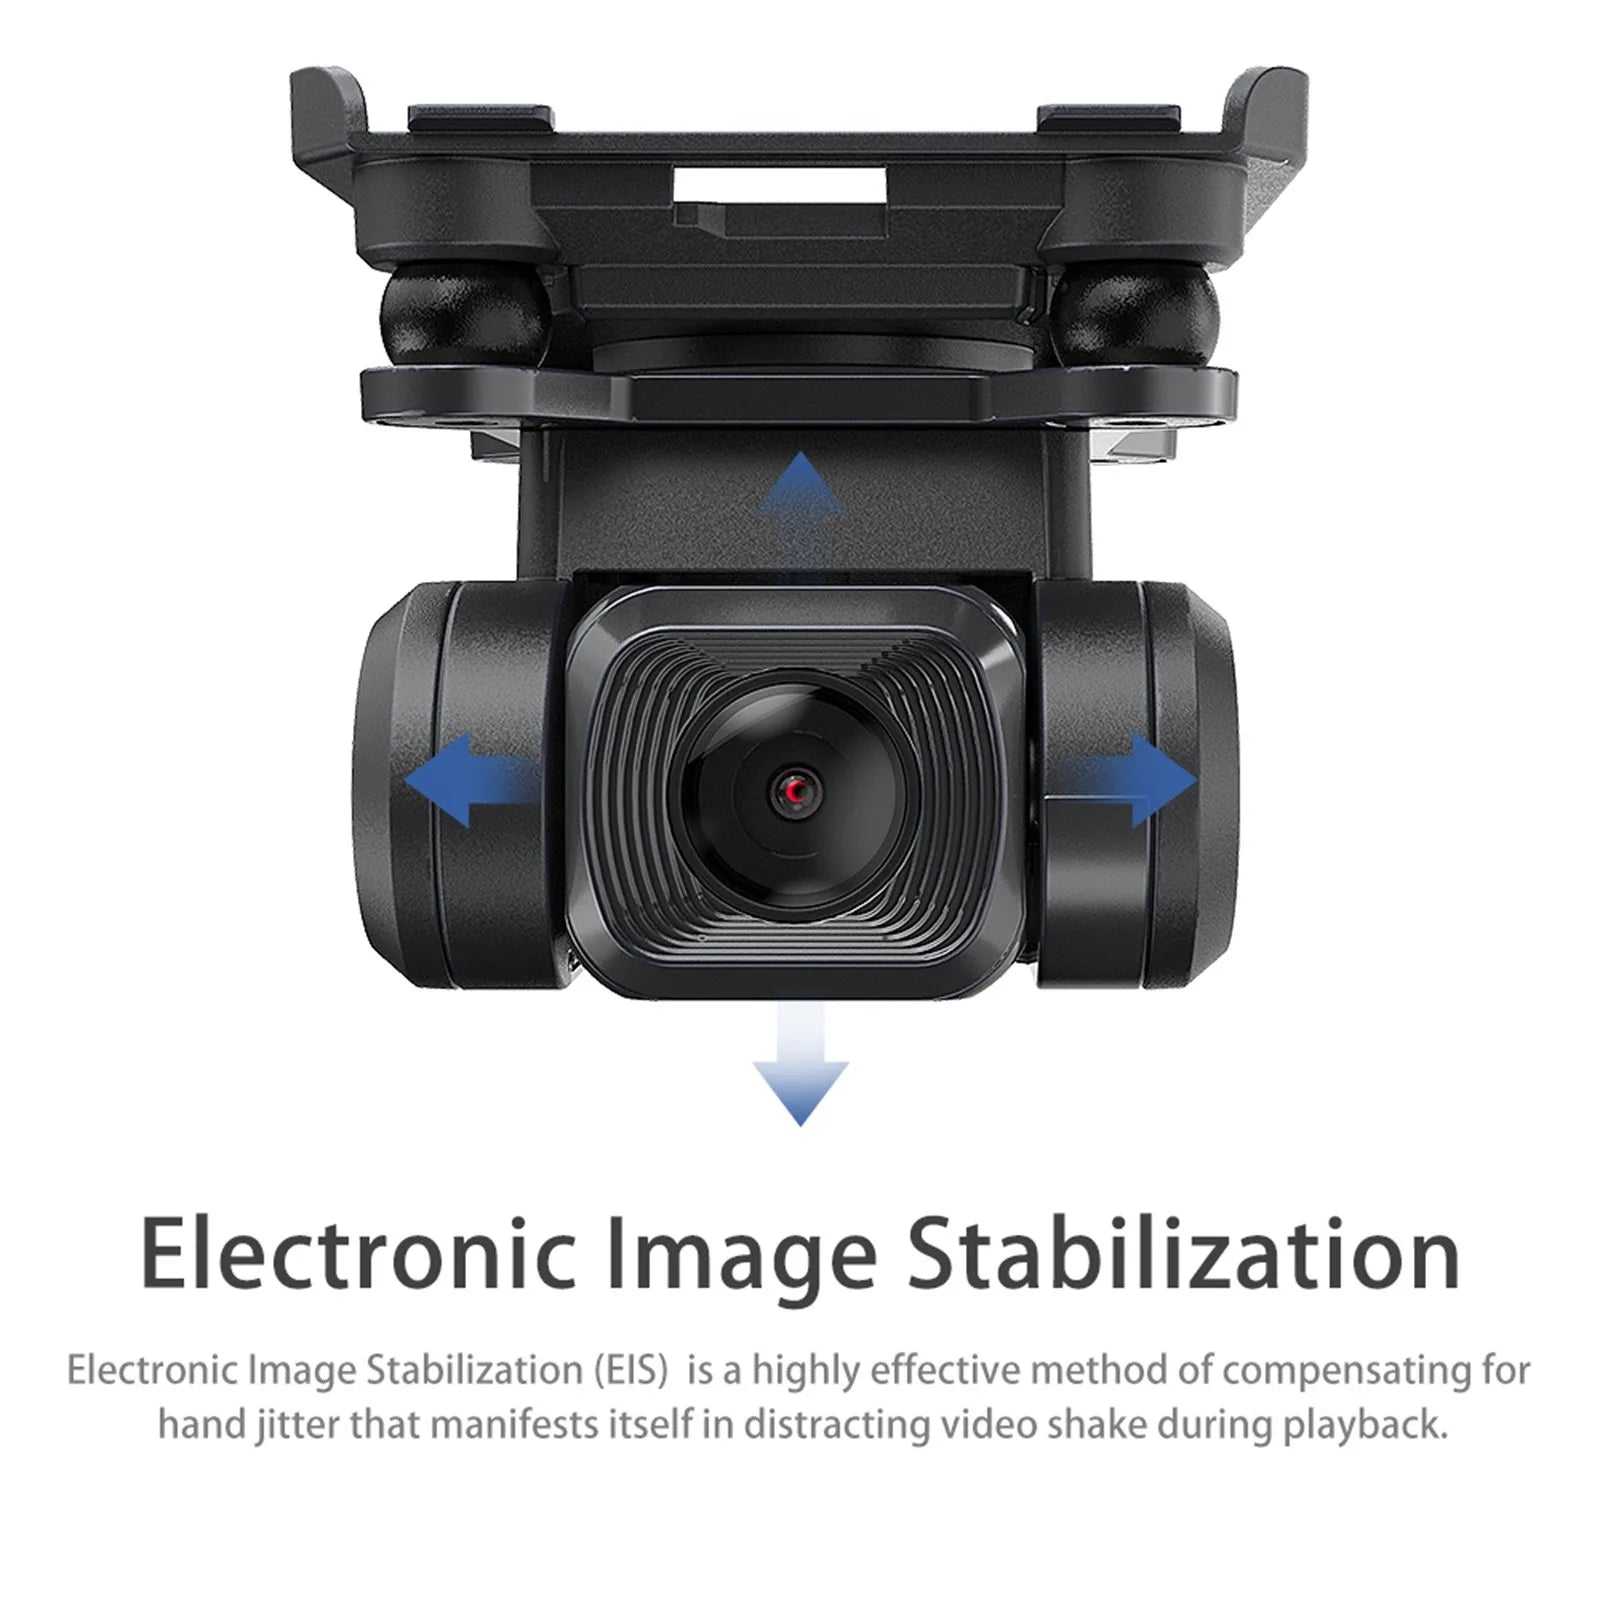 Mjx Bugs 20 Drone, Electronic Image Stabilization (EIS) is a highly effective method of compensating for